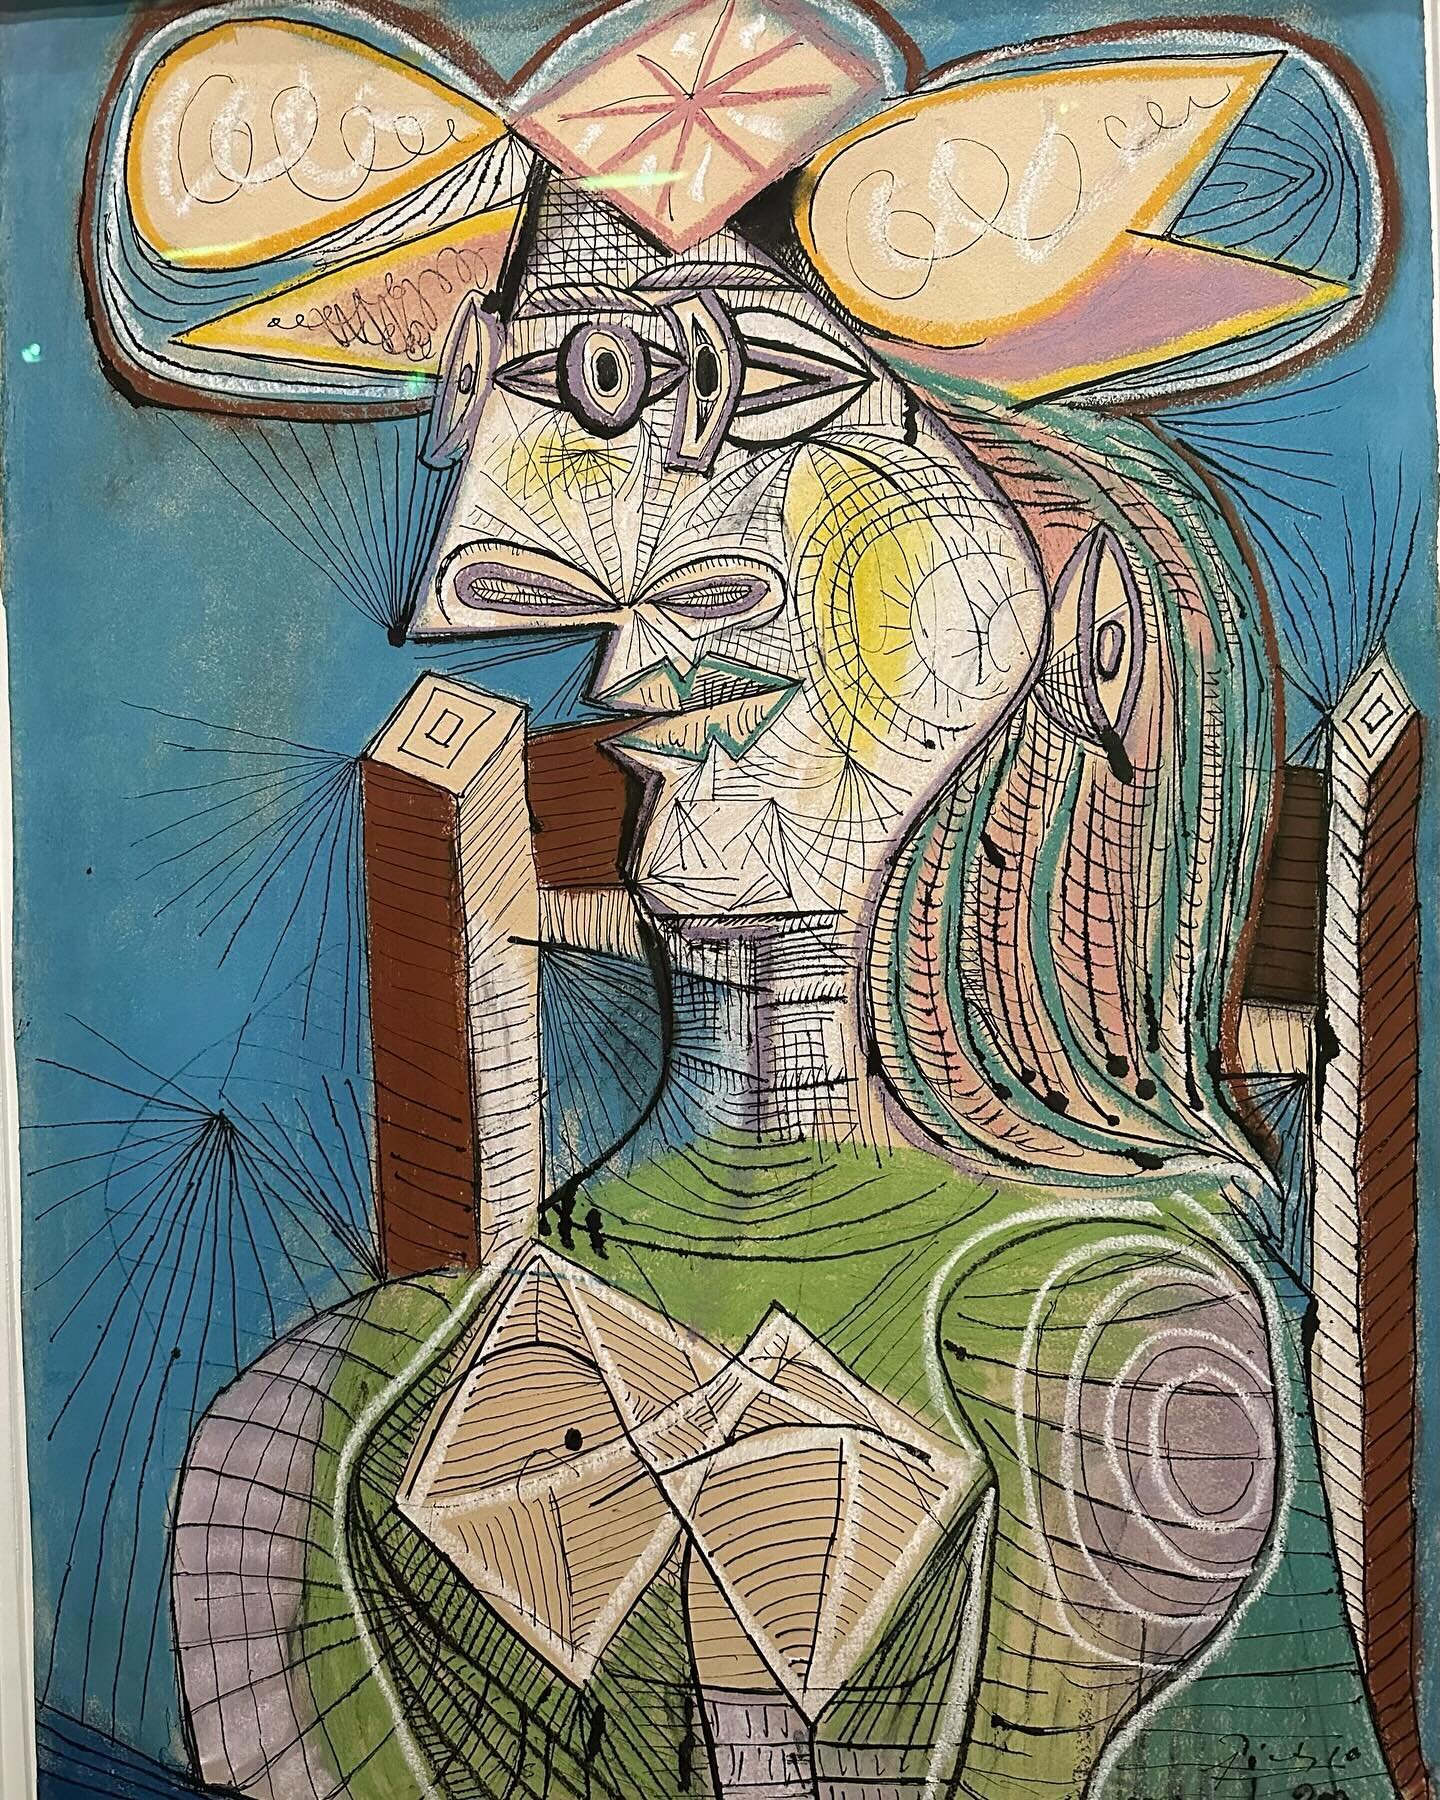 Pablo Picasso drawings @centrepompidou #drawings #pablopicasso #picasso #parisfrance